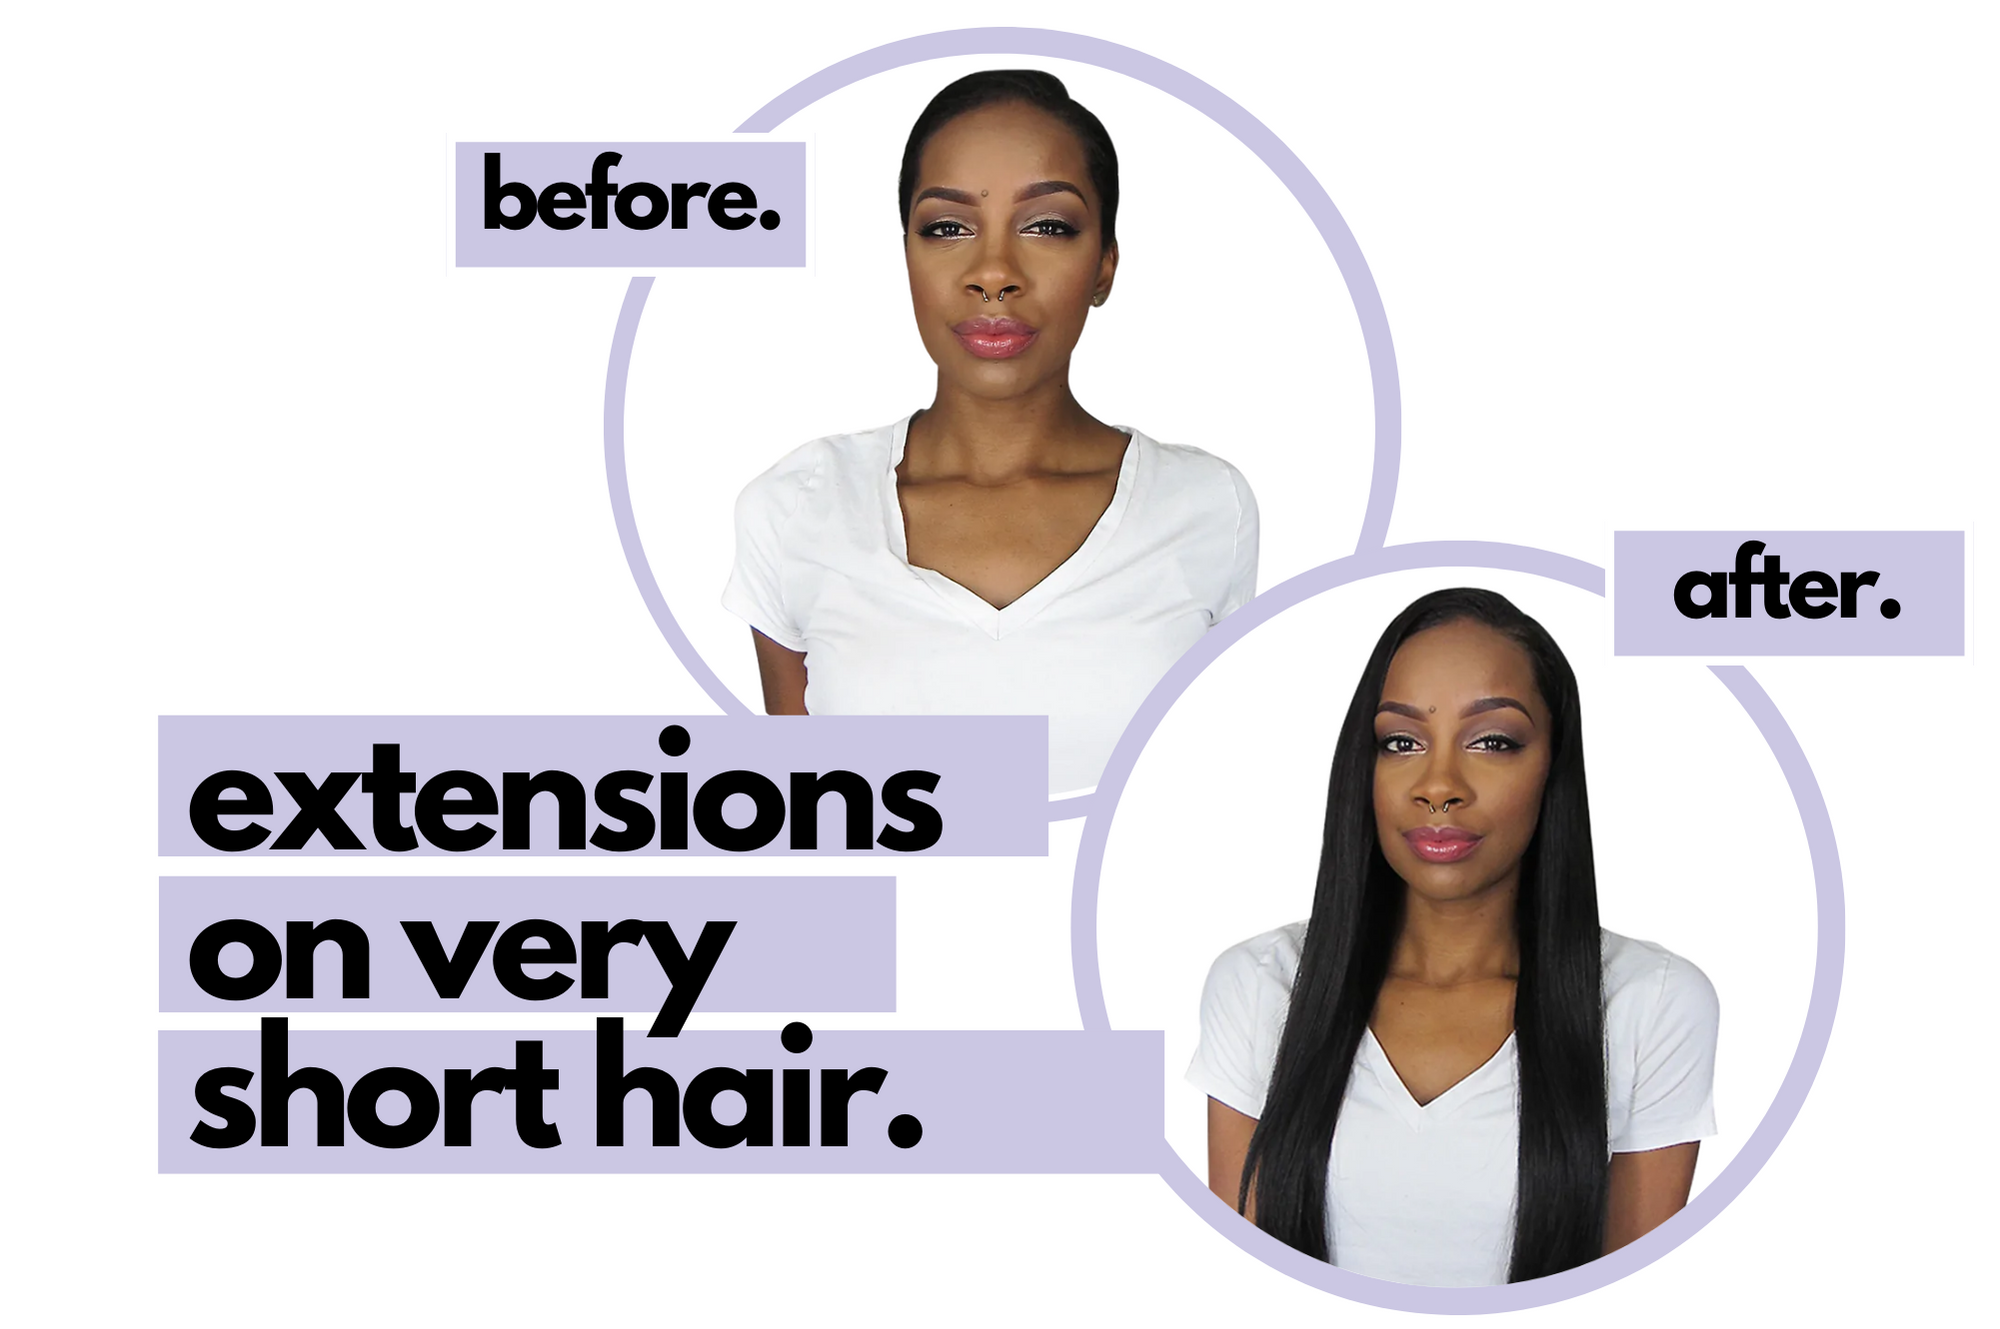 how to blend extensions with short hair in 3 steps.